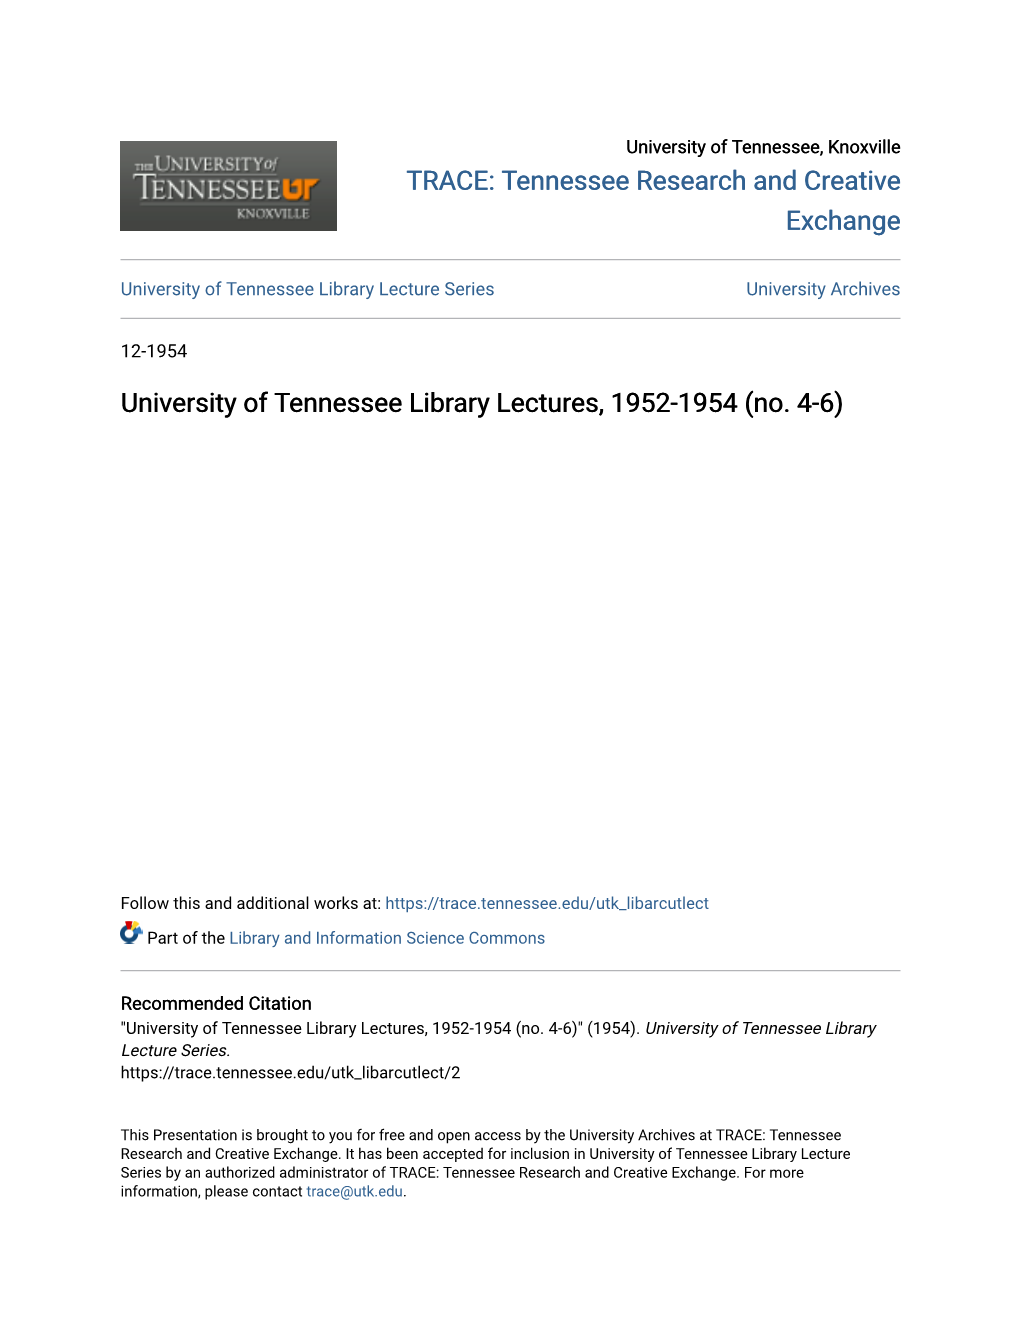 University of Tennessee Library Lectures, 1952-1954 (No. 4-6)